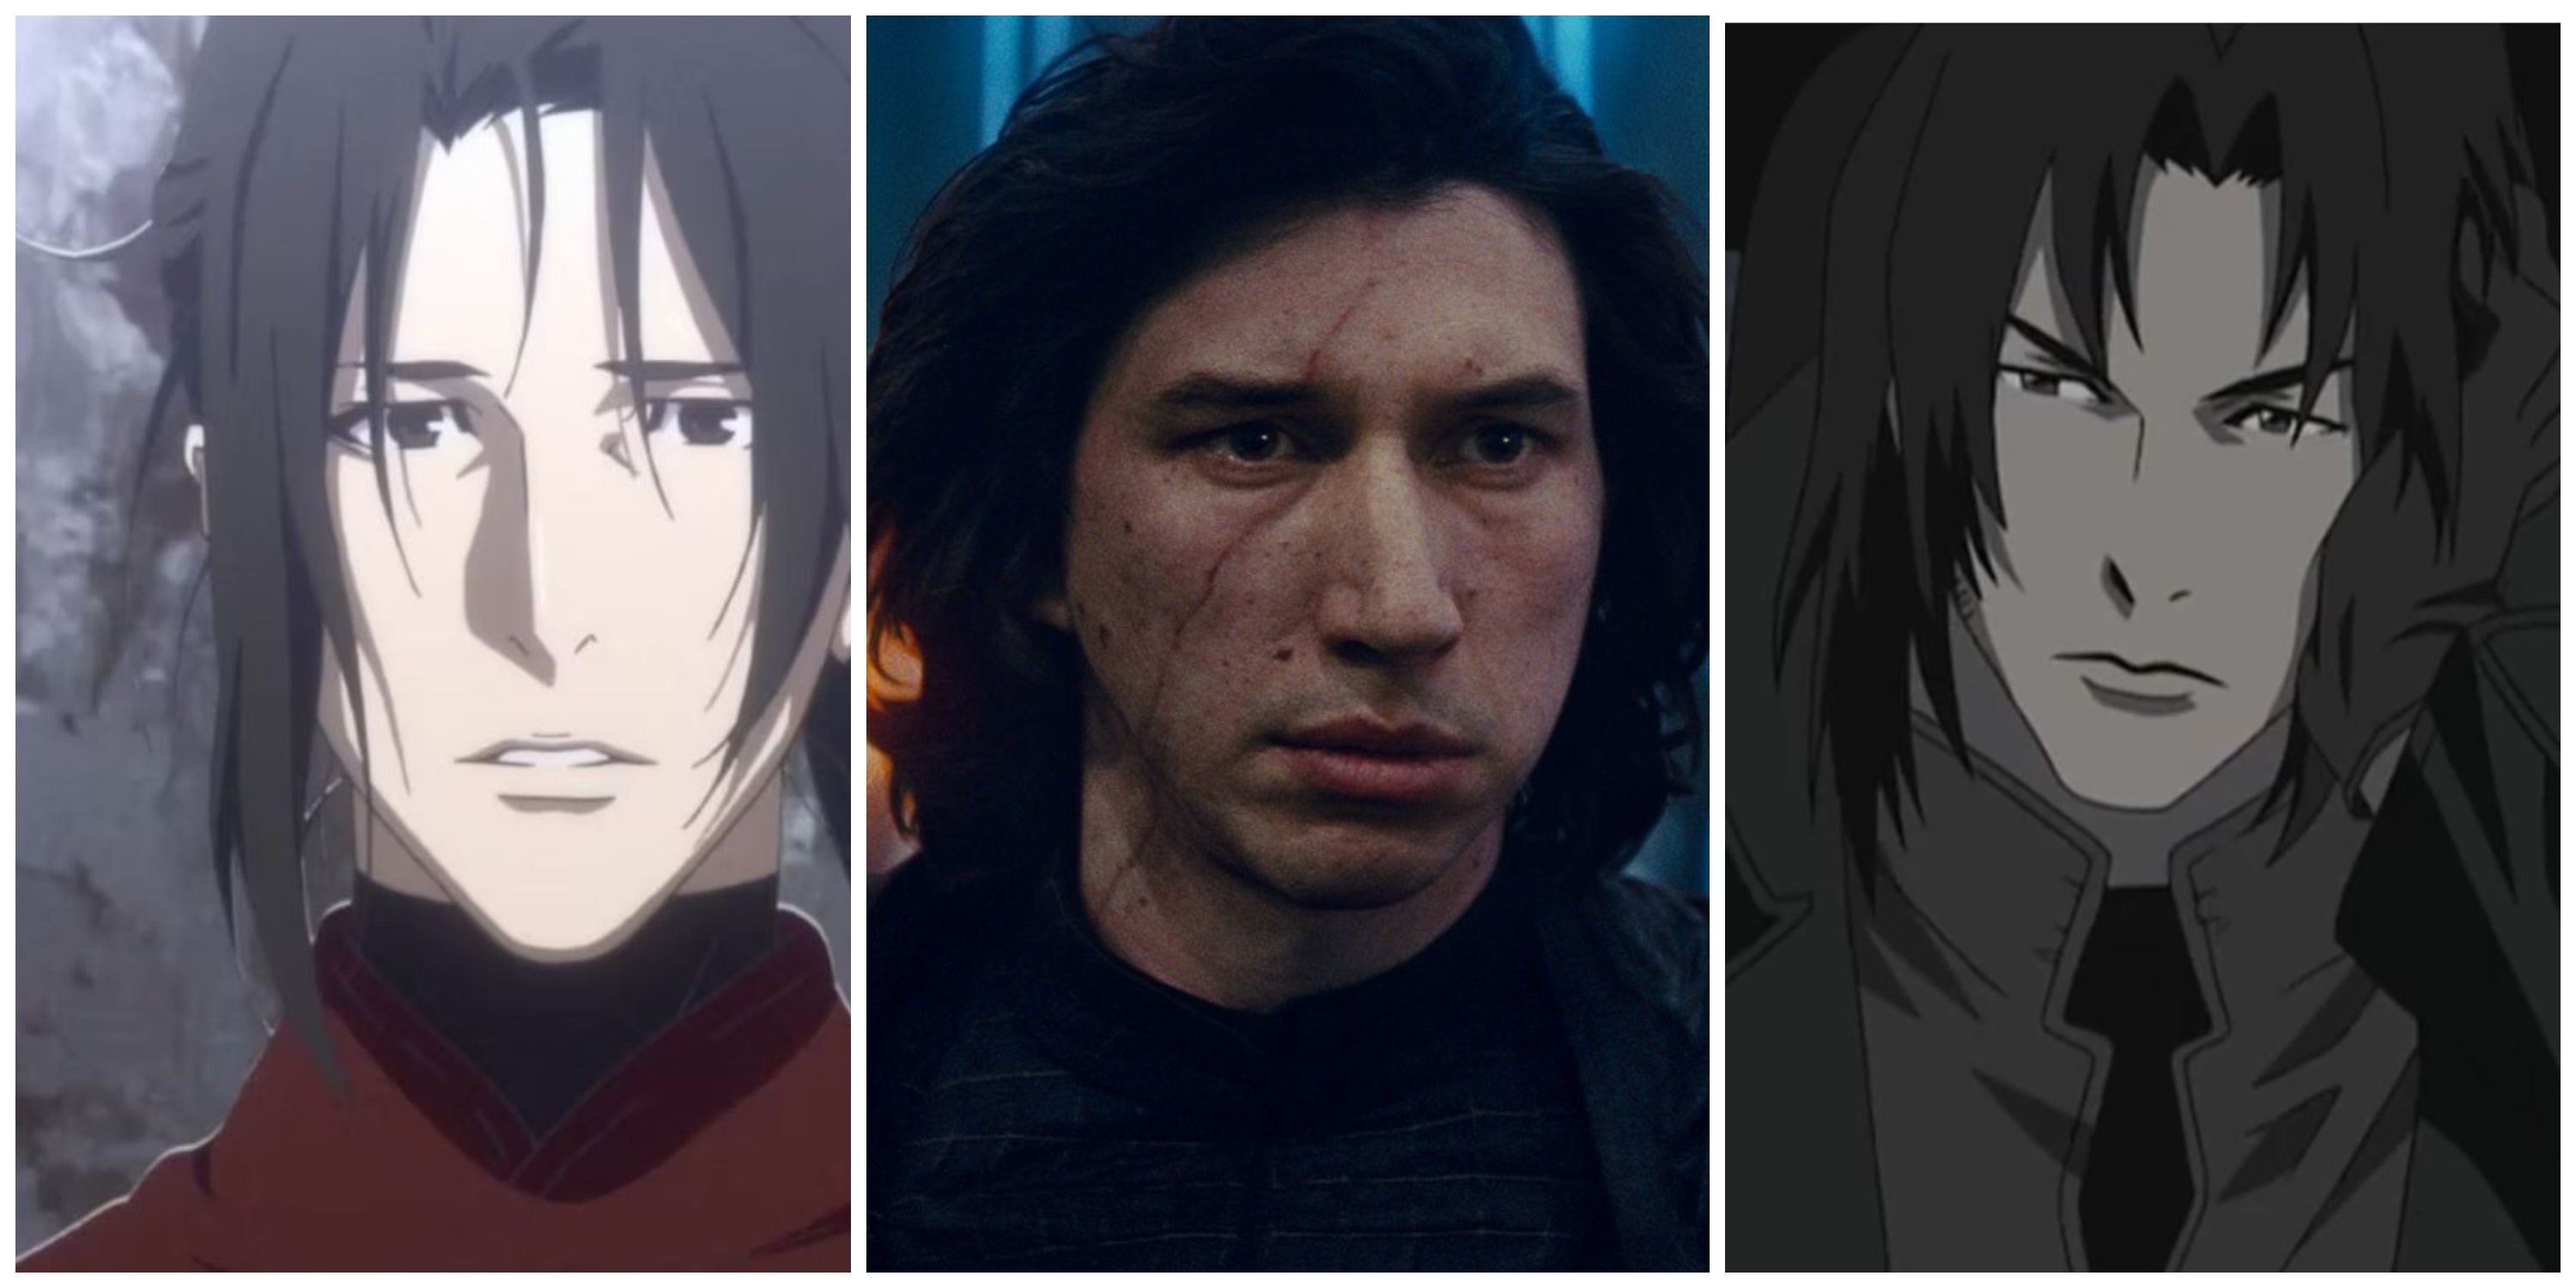 Split image, Yukimaru from Fena Pirate Princess, Kylo Ren from Star Wars, and Amon from Witch Hunter Robin